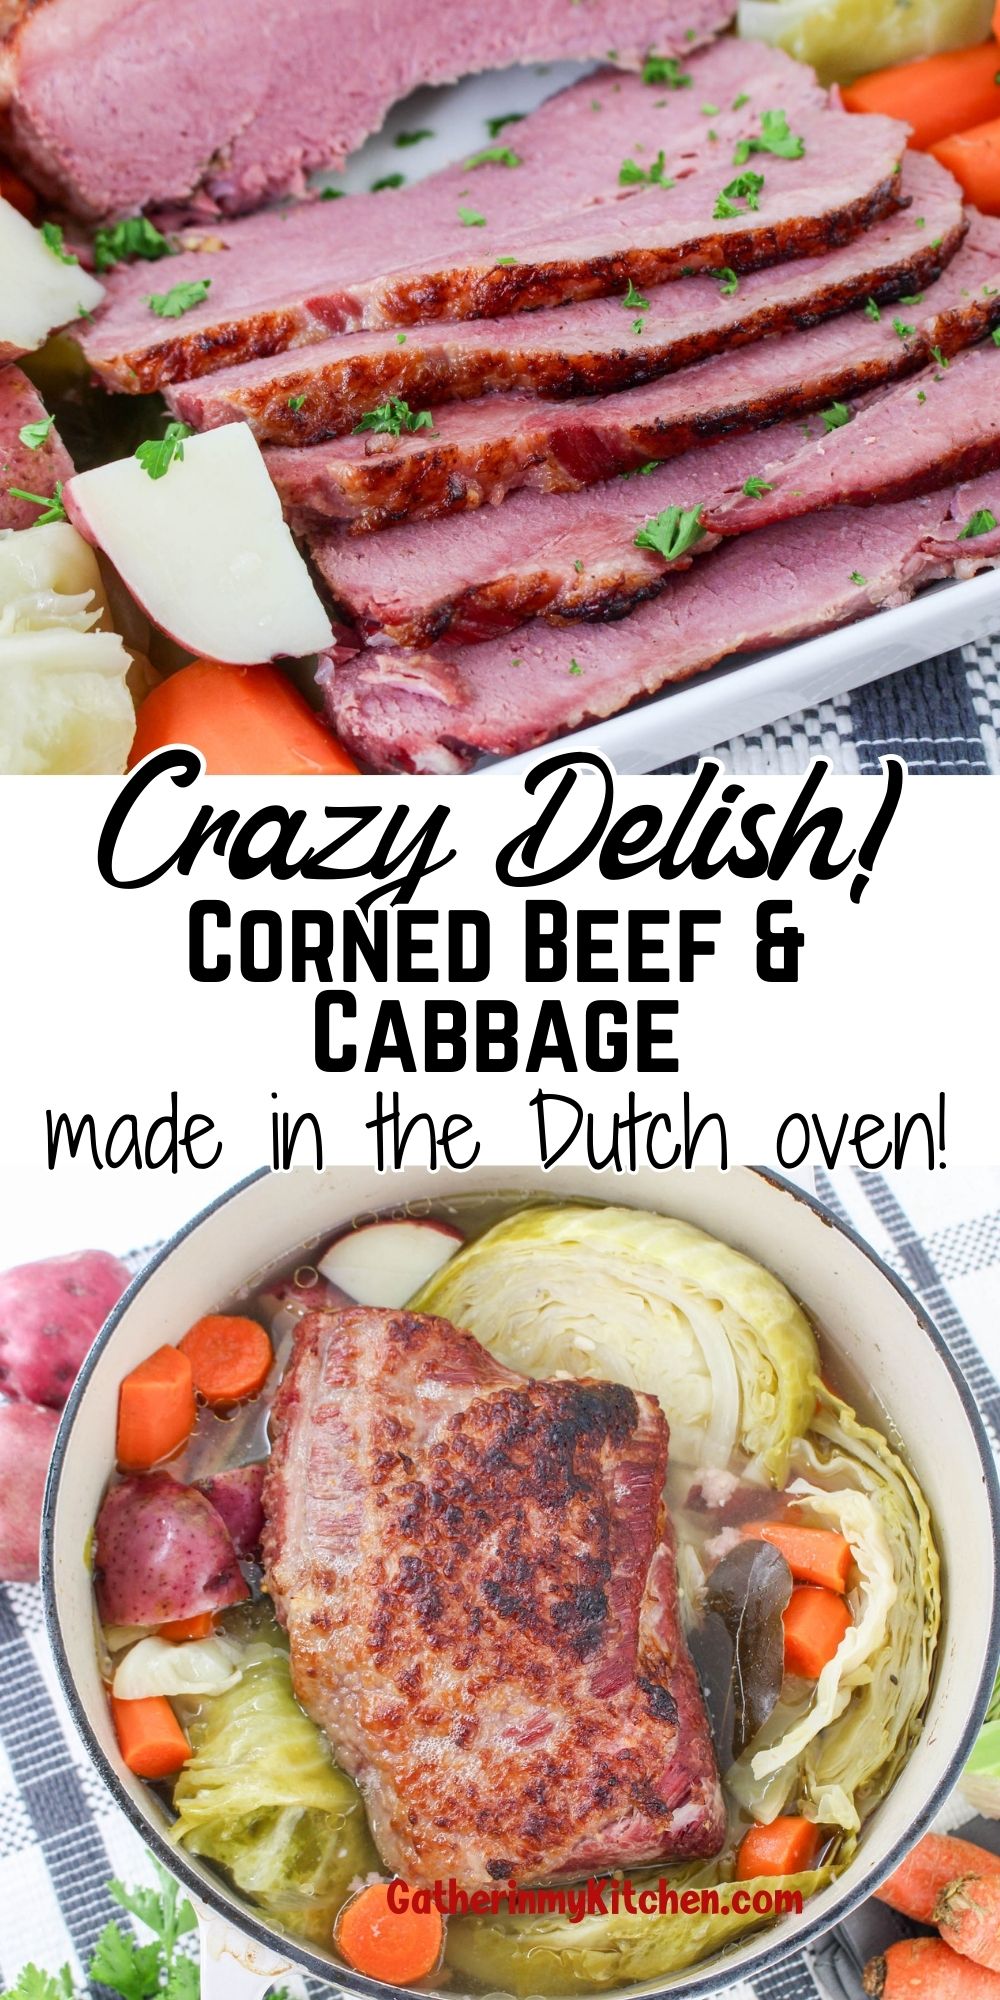 Pin image: top and bottom have corned beef and cabbage pics and middle says "Crazy delish! Corned beef and cabbage made in the Dutch oven!".